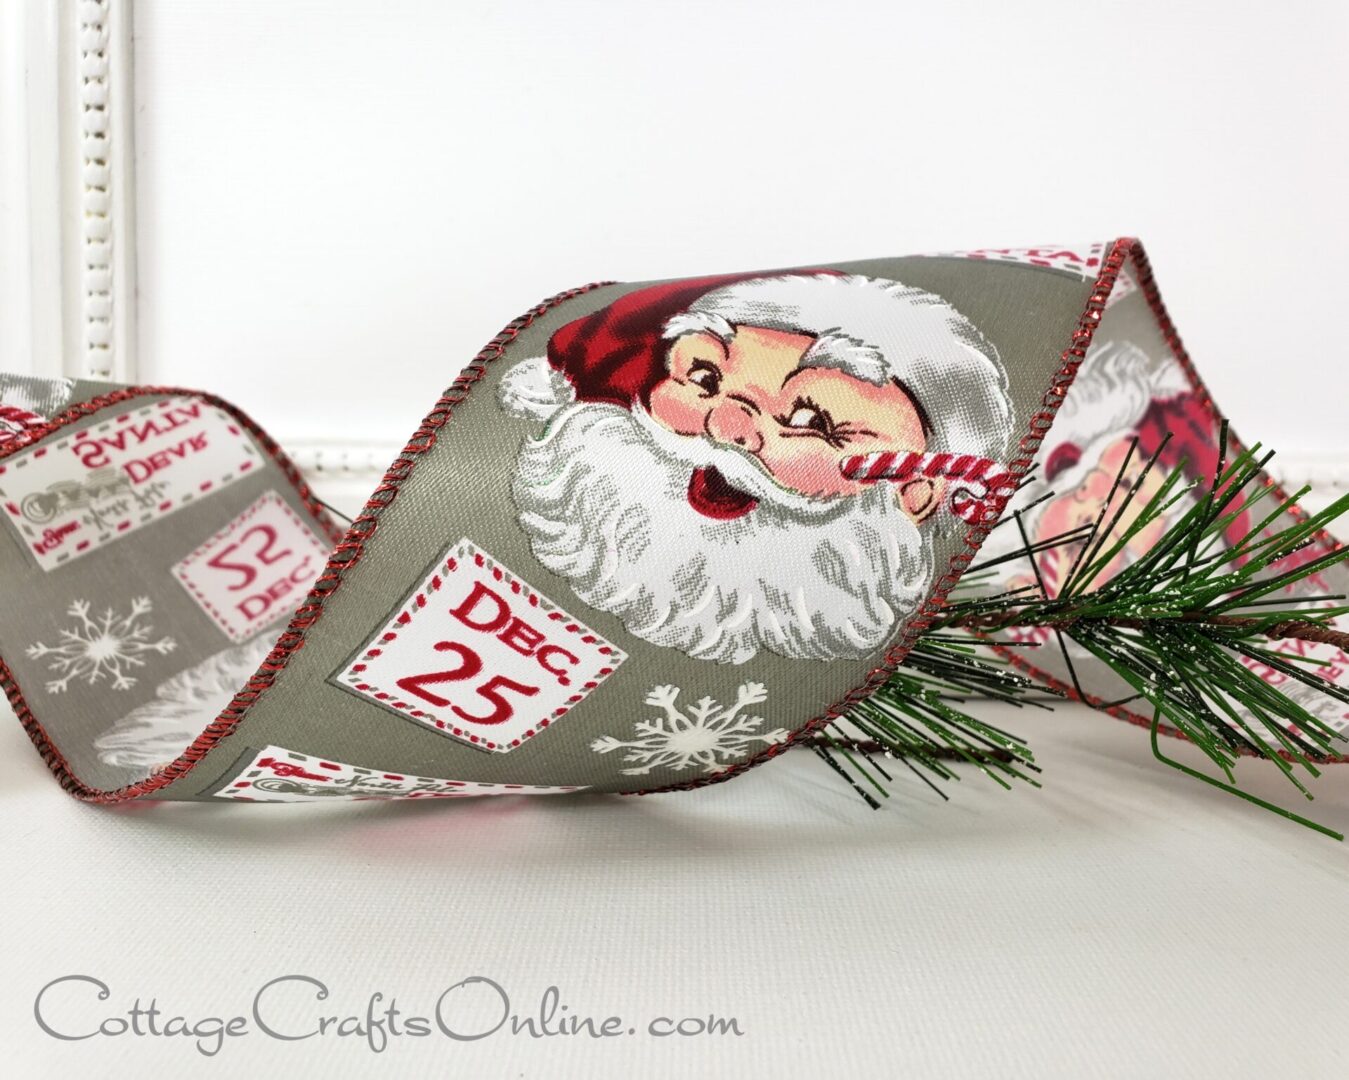 Vintage Santa with letters and snowflakes on grey green 2.5" wired ribbon from the Etsy shop of Cottage Crafts Online.